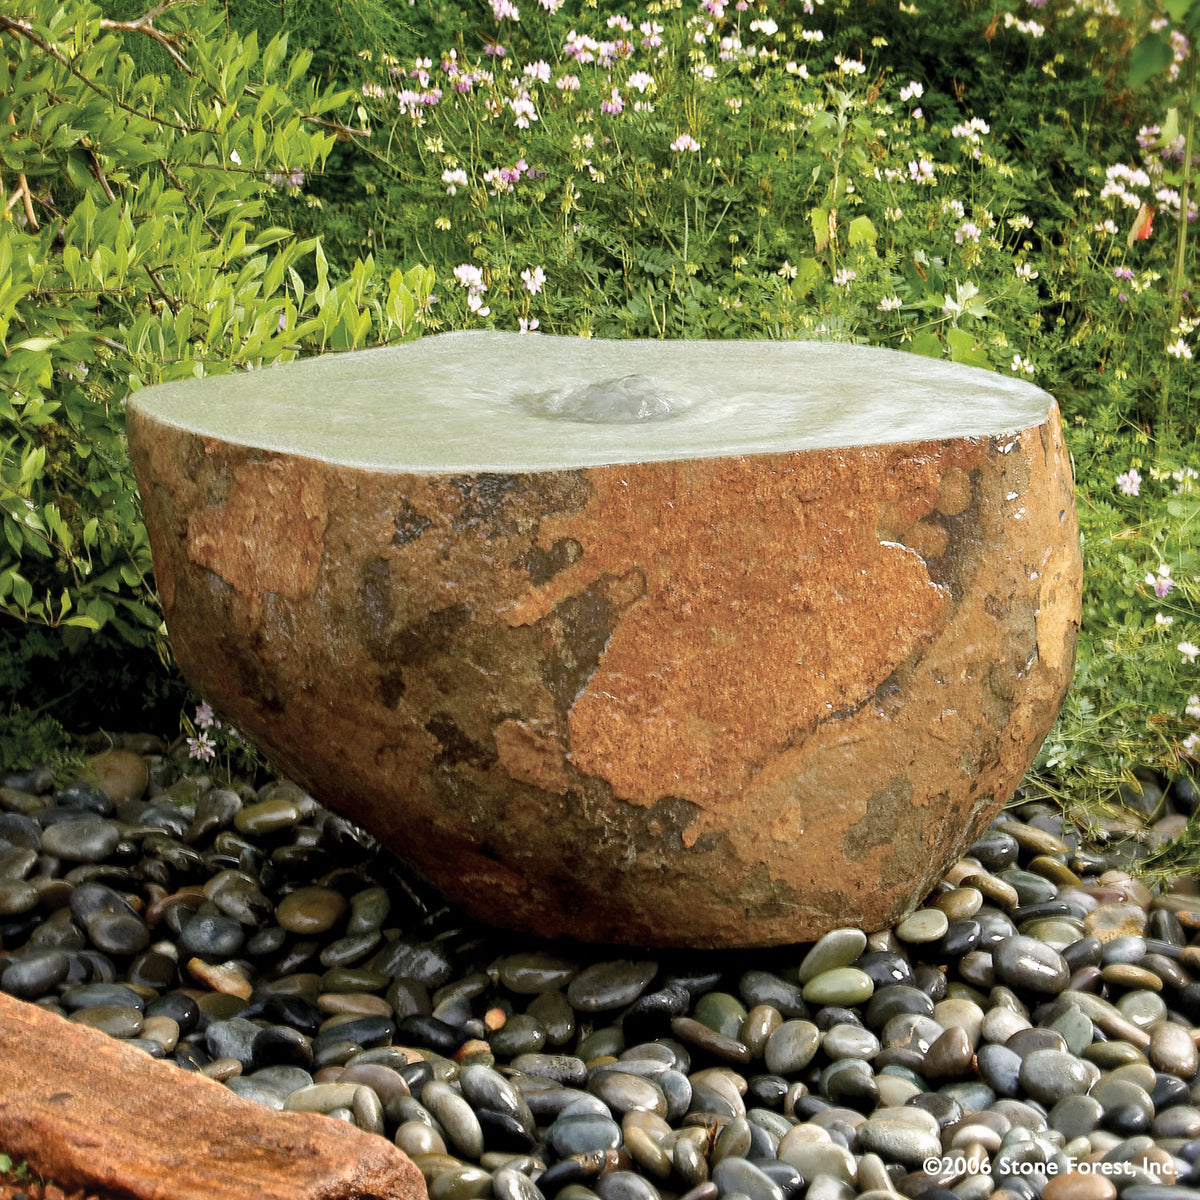 Stone Forest Hand Carved Edo garden fountain made from a granite boulder image 1 of 5